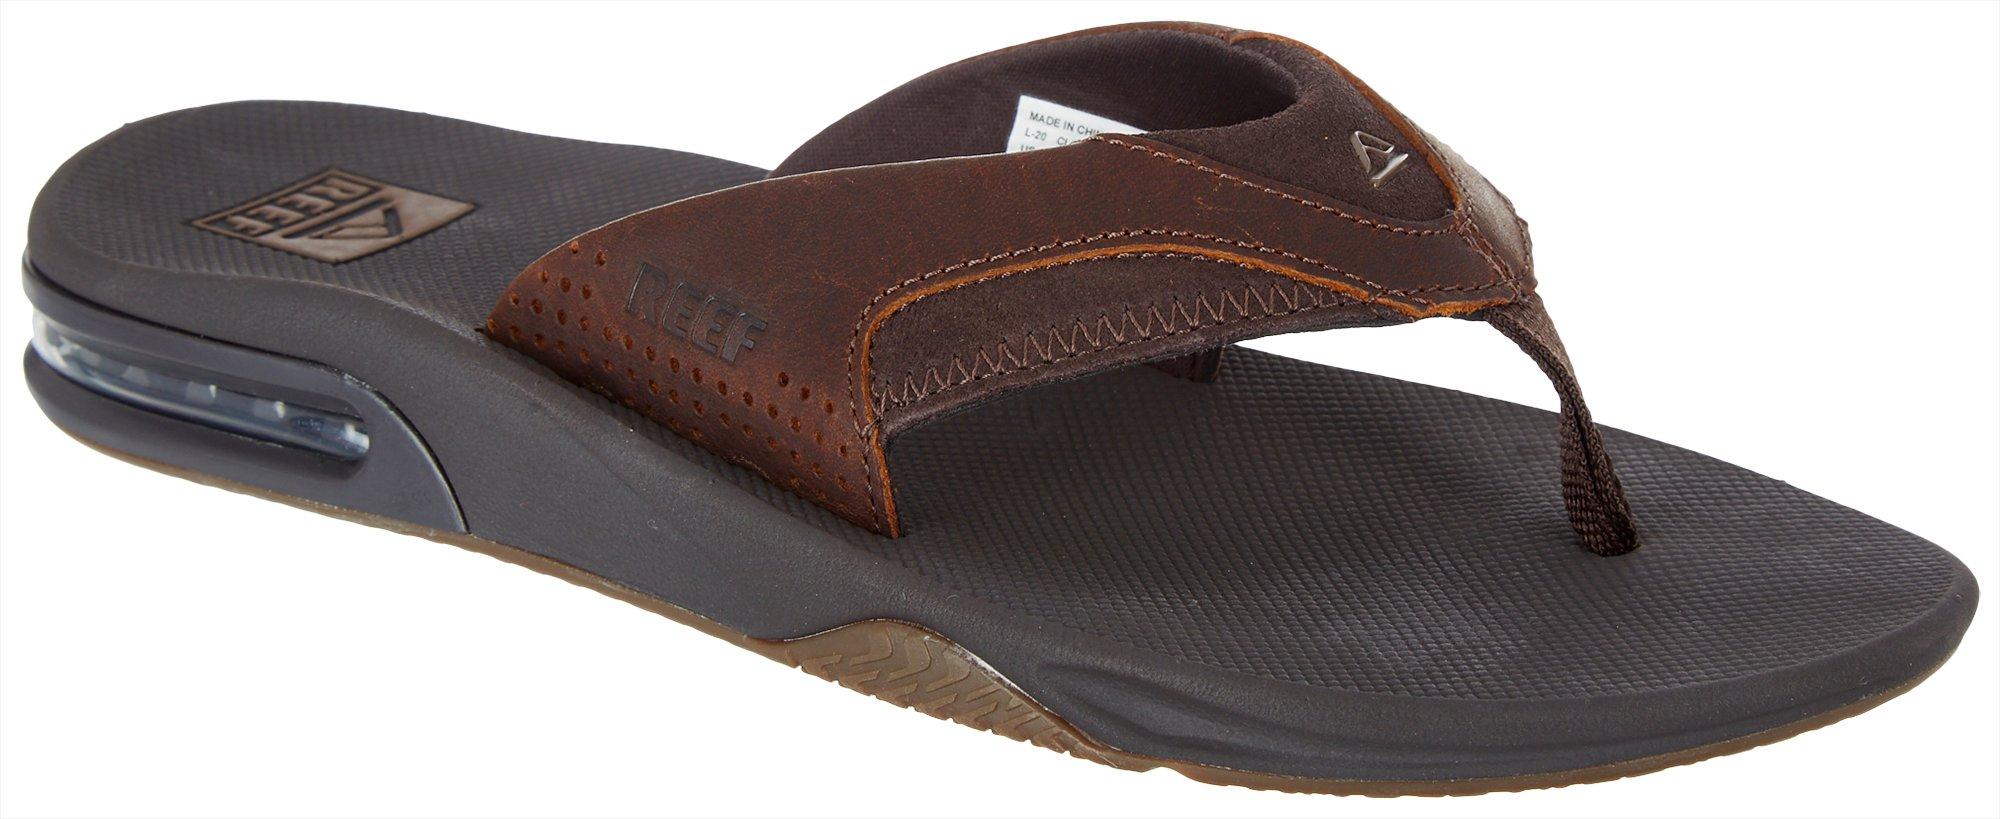 REEF Mens Leather Fanning Sandals